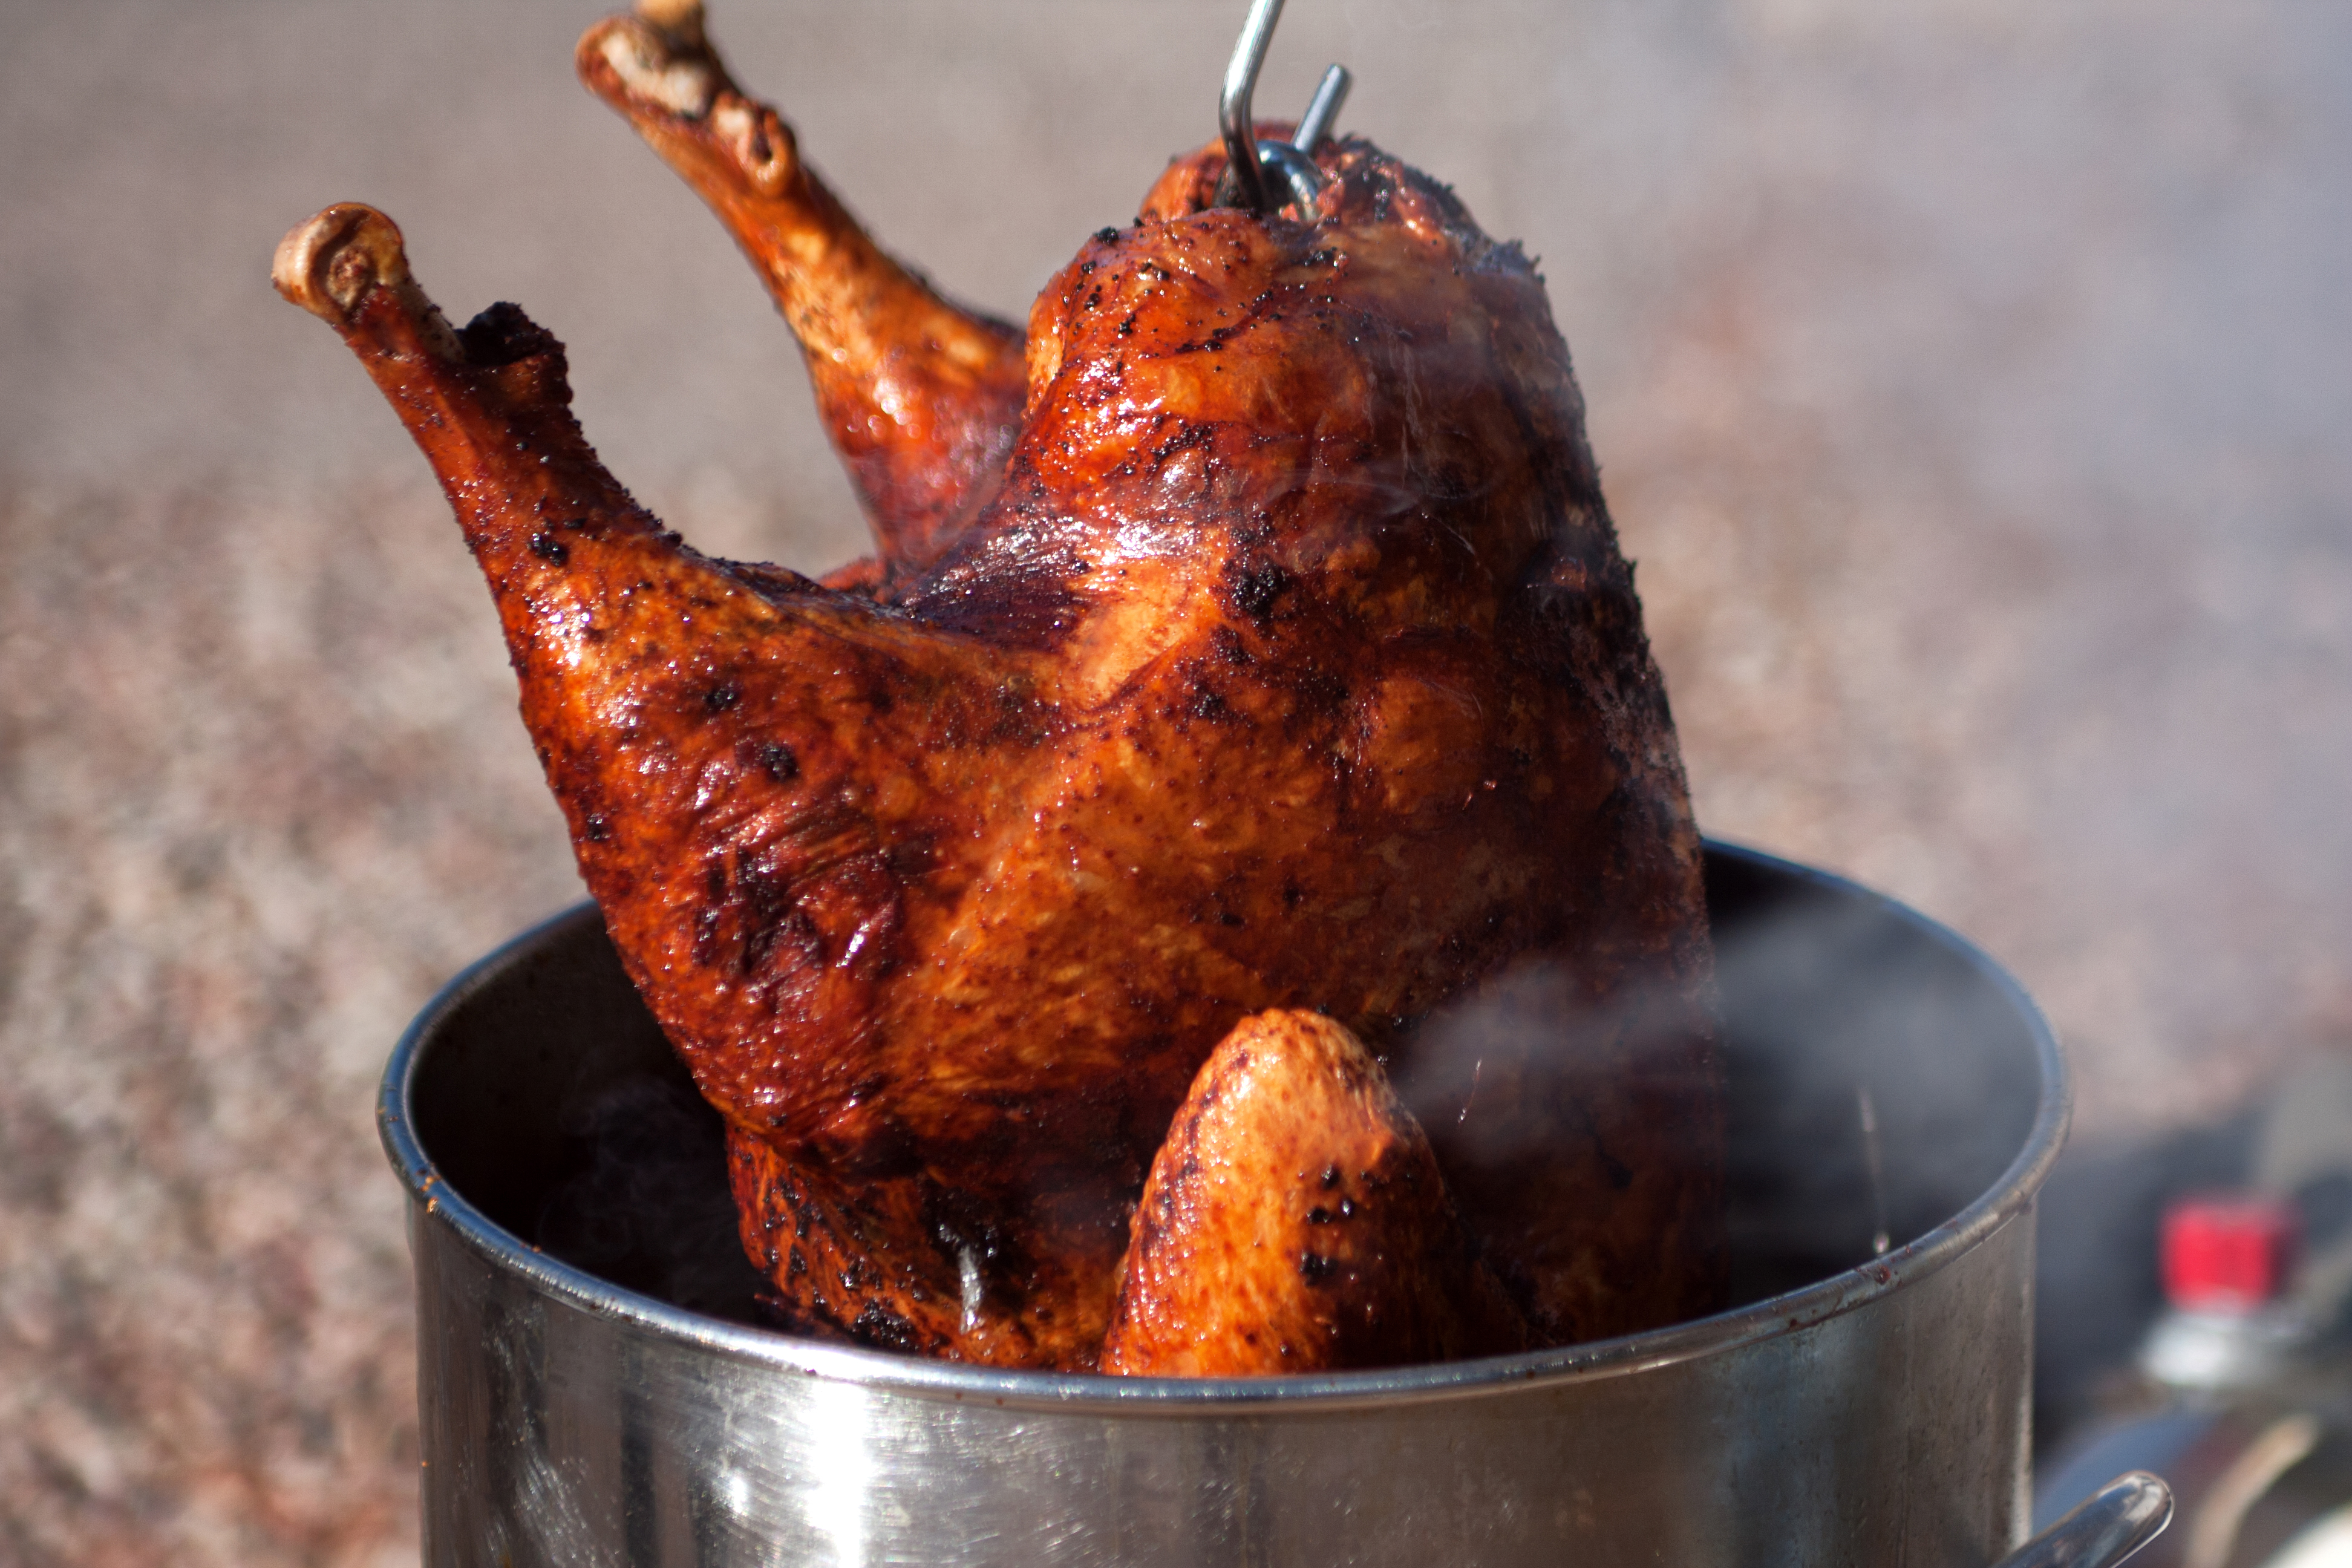 6 Steps to (Safely) Frying a Turkey